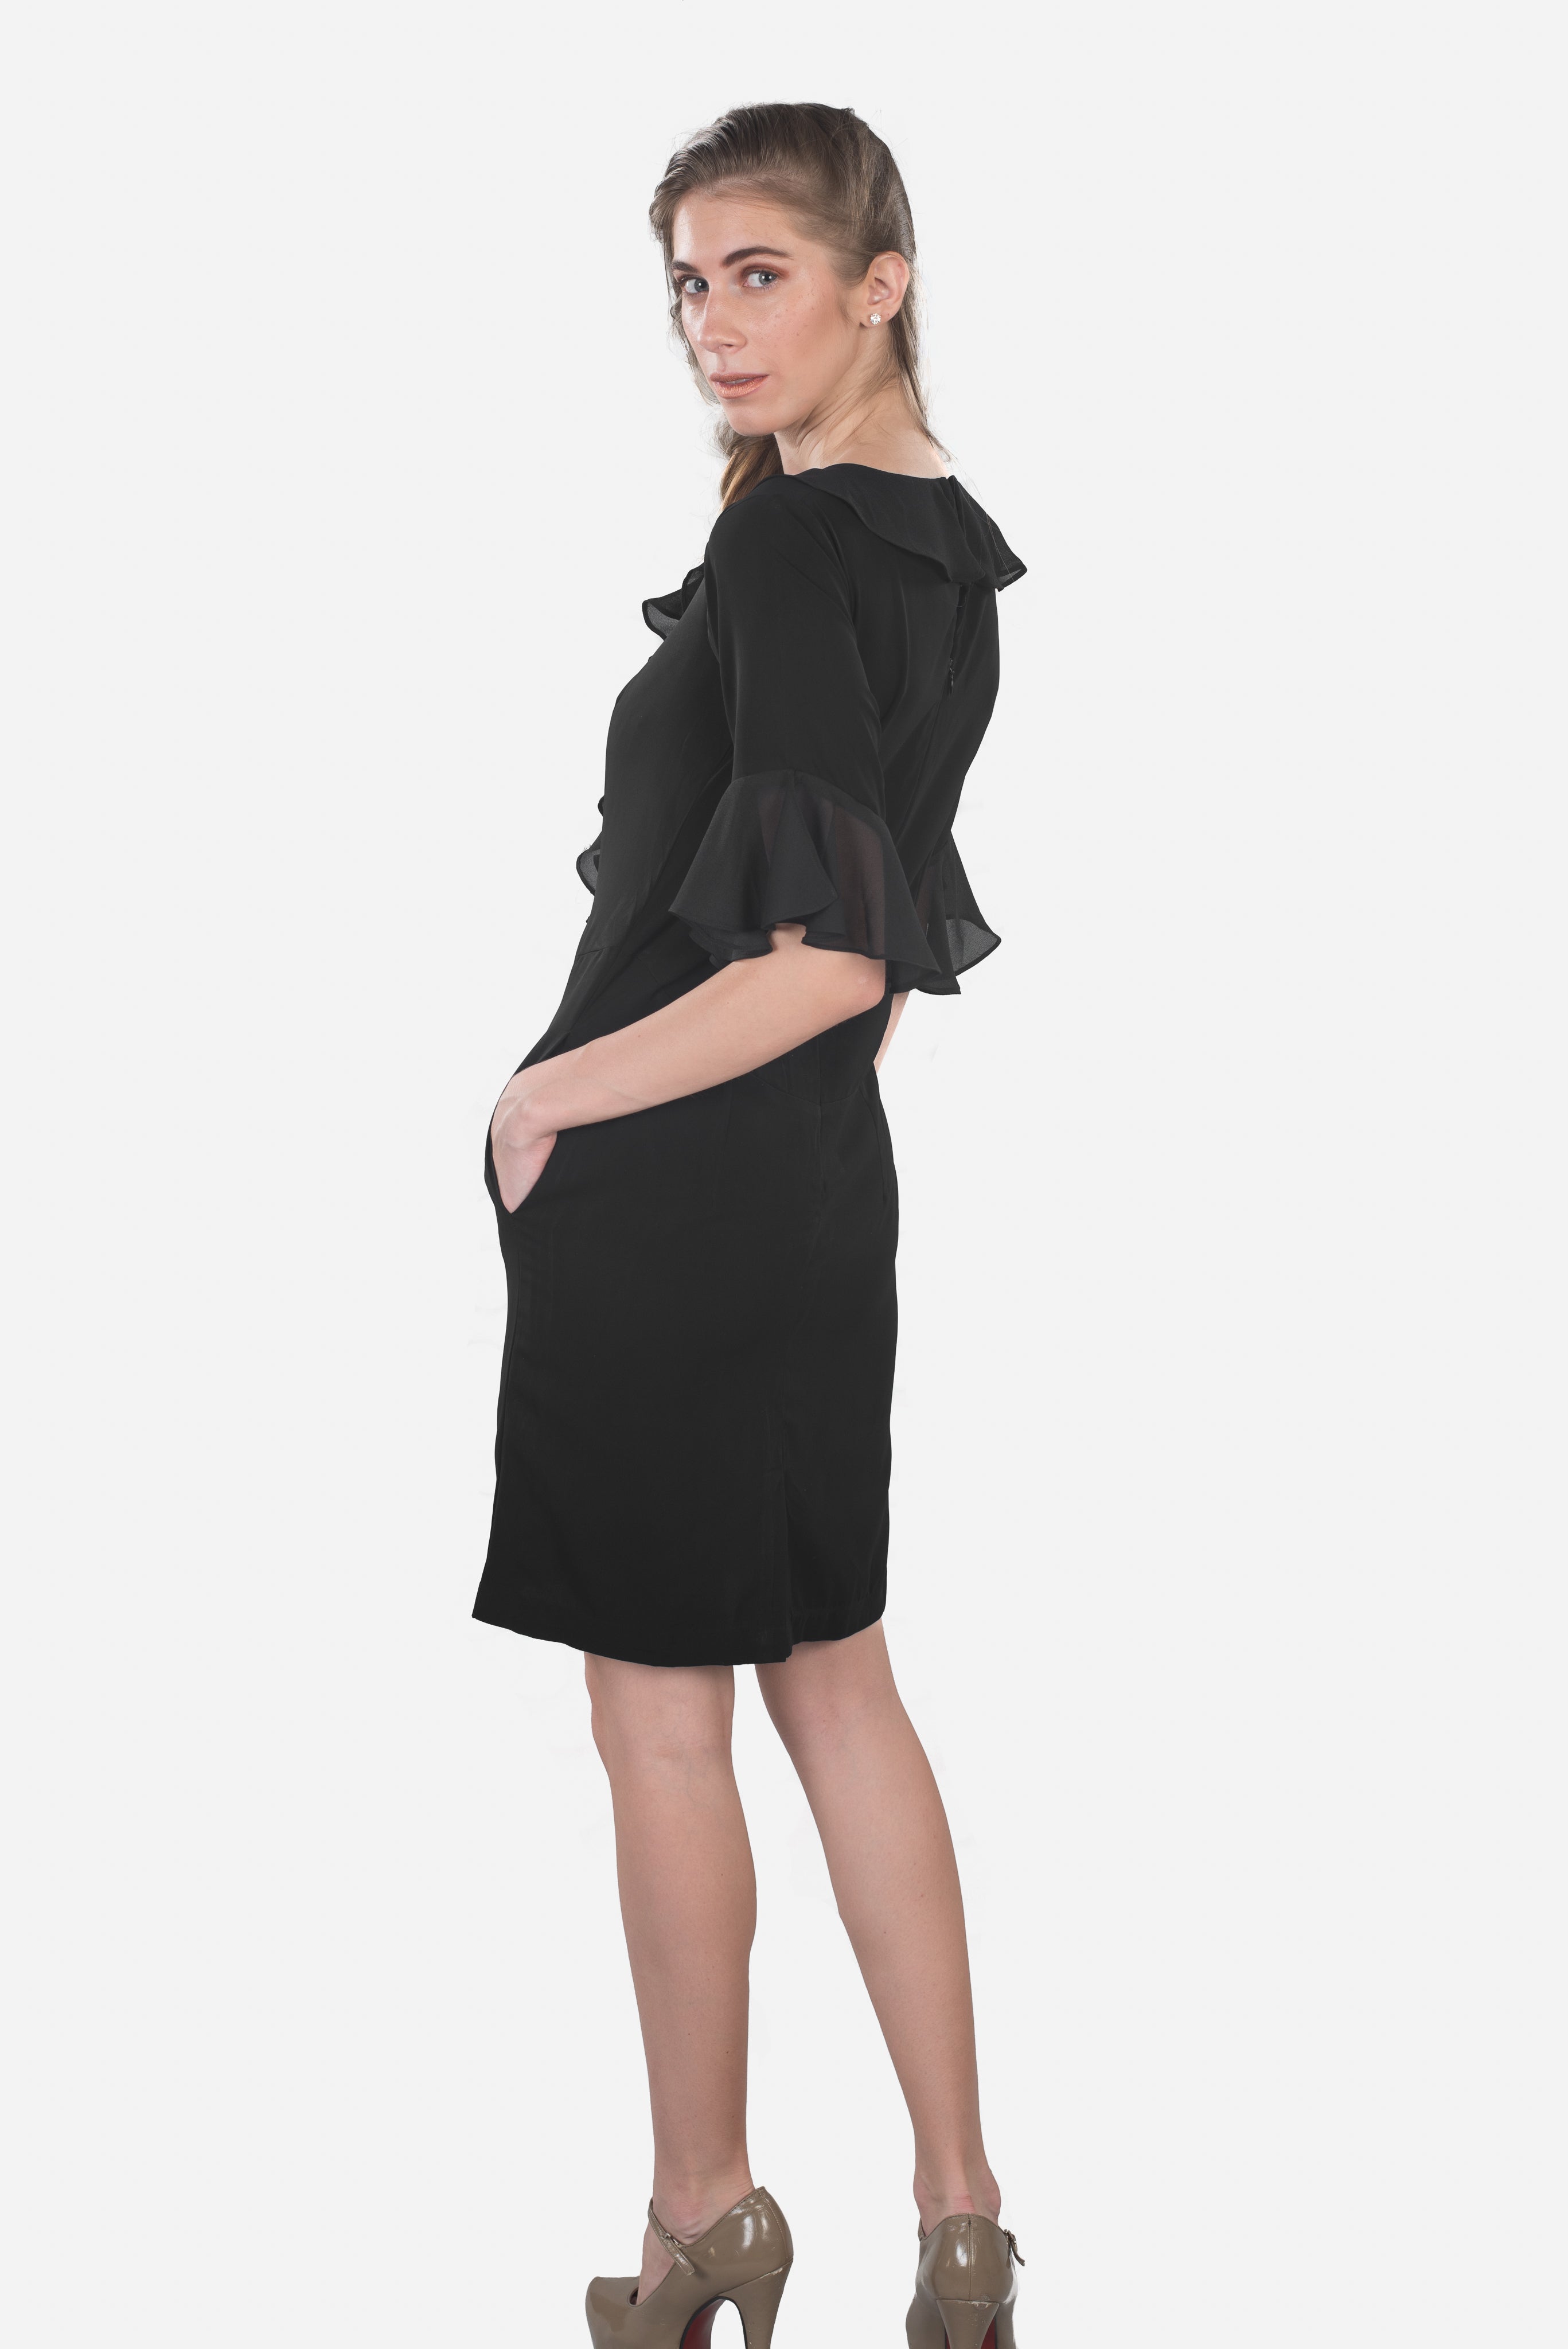 Women’s black dress with pockets, ruffled dress, flared sleeves, evening wear, special occasion dress, semi-formal black dress, party wear #dresseswithpockets #blackdresseswithpockets #blackdress #formaldresses #dresses #dressesforwomen #classydress #classyblackdress #beautifulblackdress #darkdress #prettyblackdress #blackdresseswithpockets #elegantdress #perfectlittleblackdress #womensblackdress #blackdressforwomen #ruffleddress #blackcocktaildress